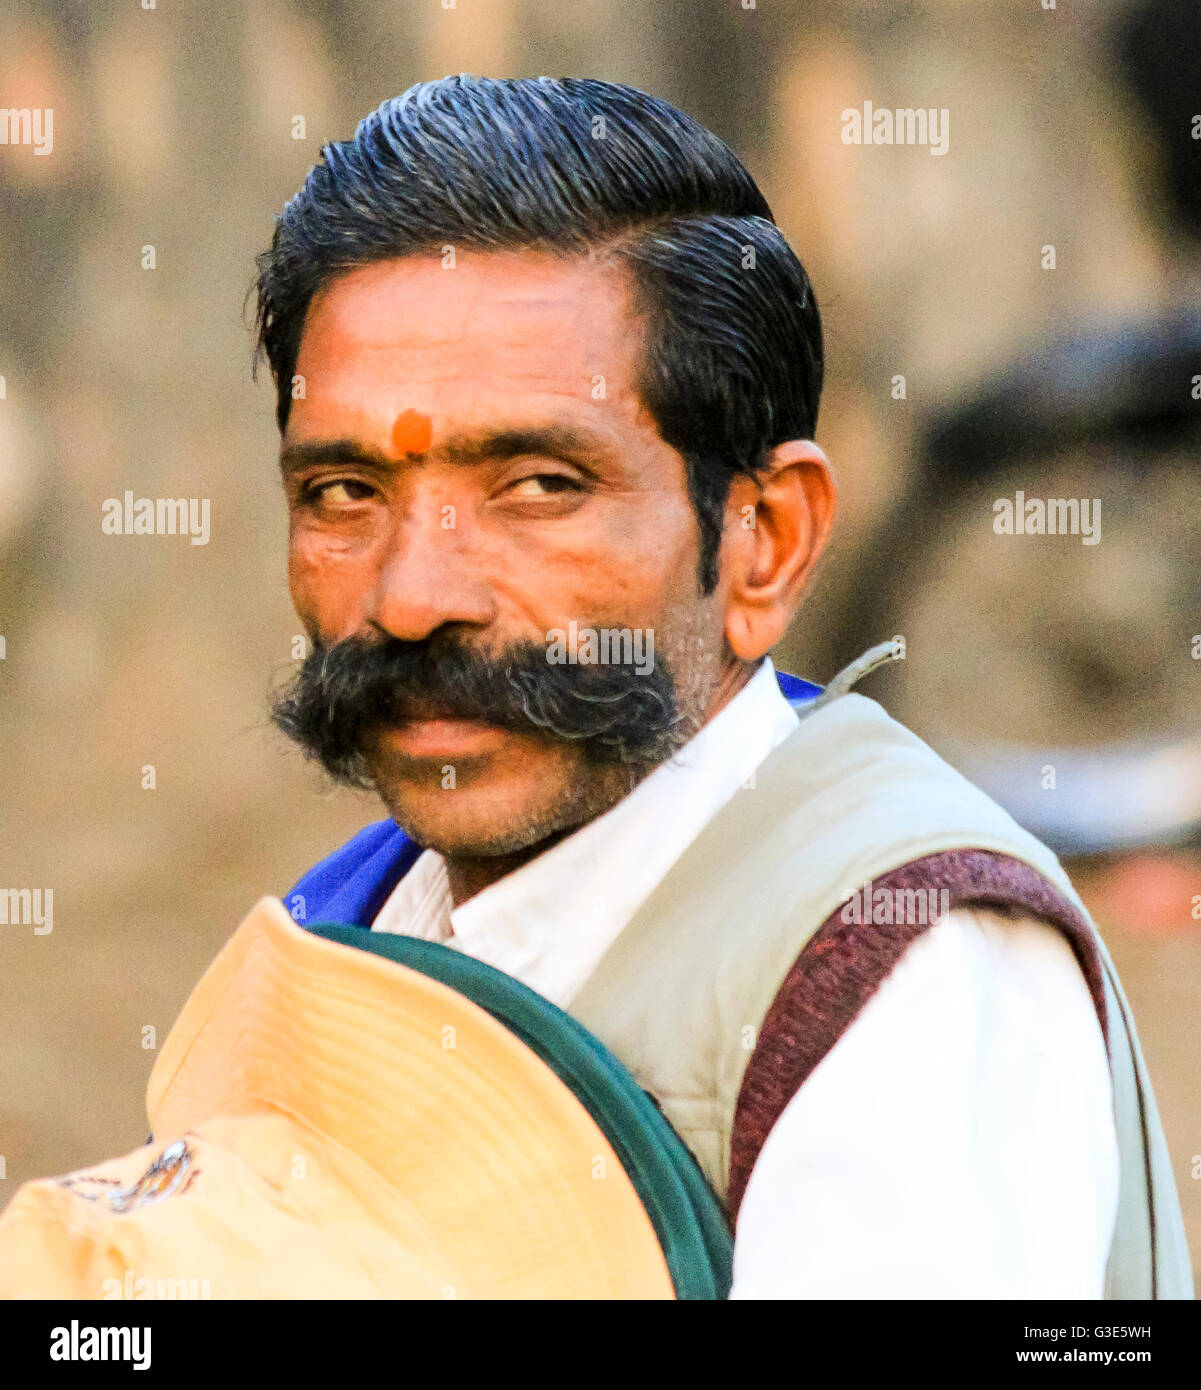 Indian Man With Tilak High Resolution Stock Photography and Images - Alamy